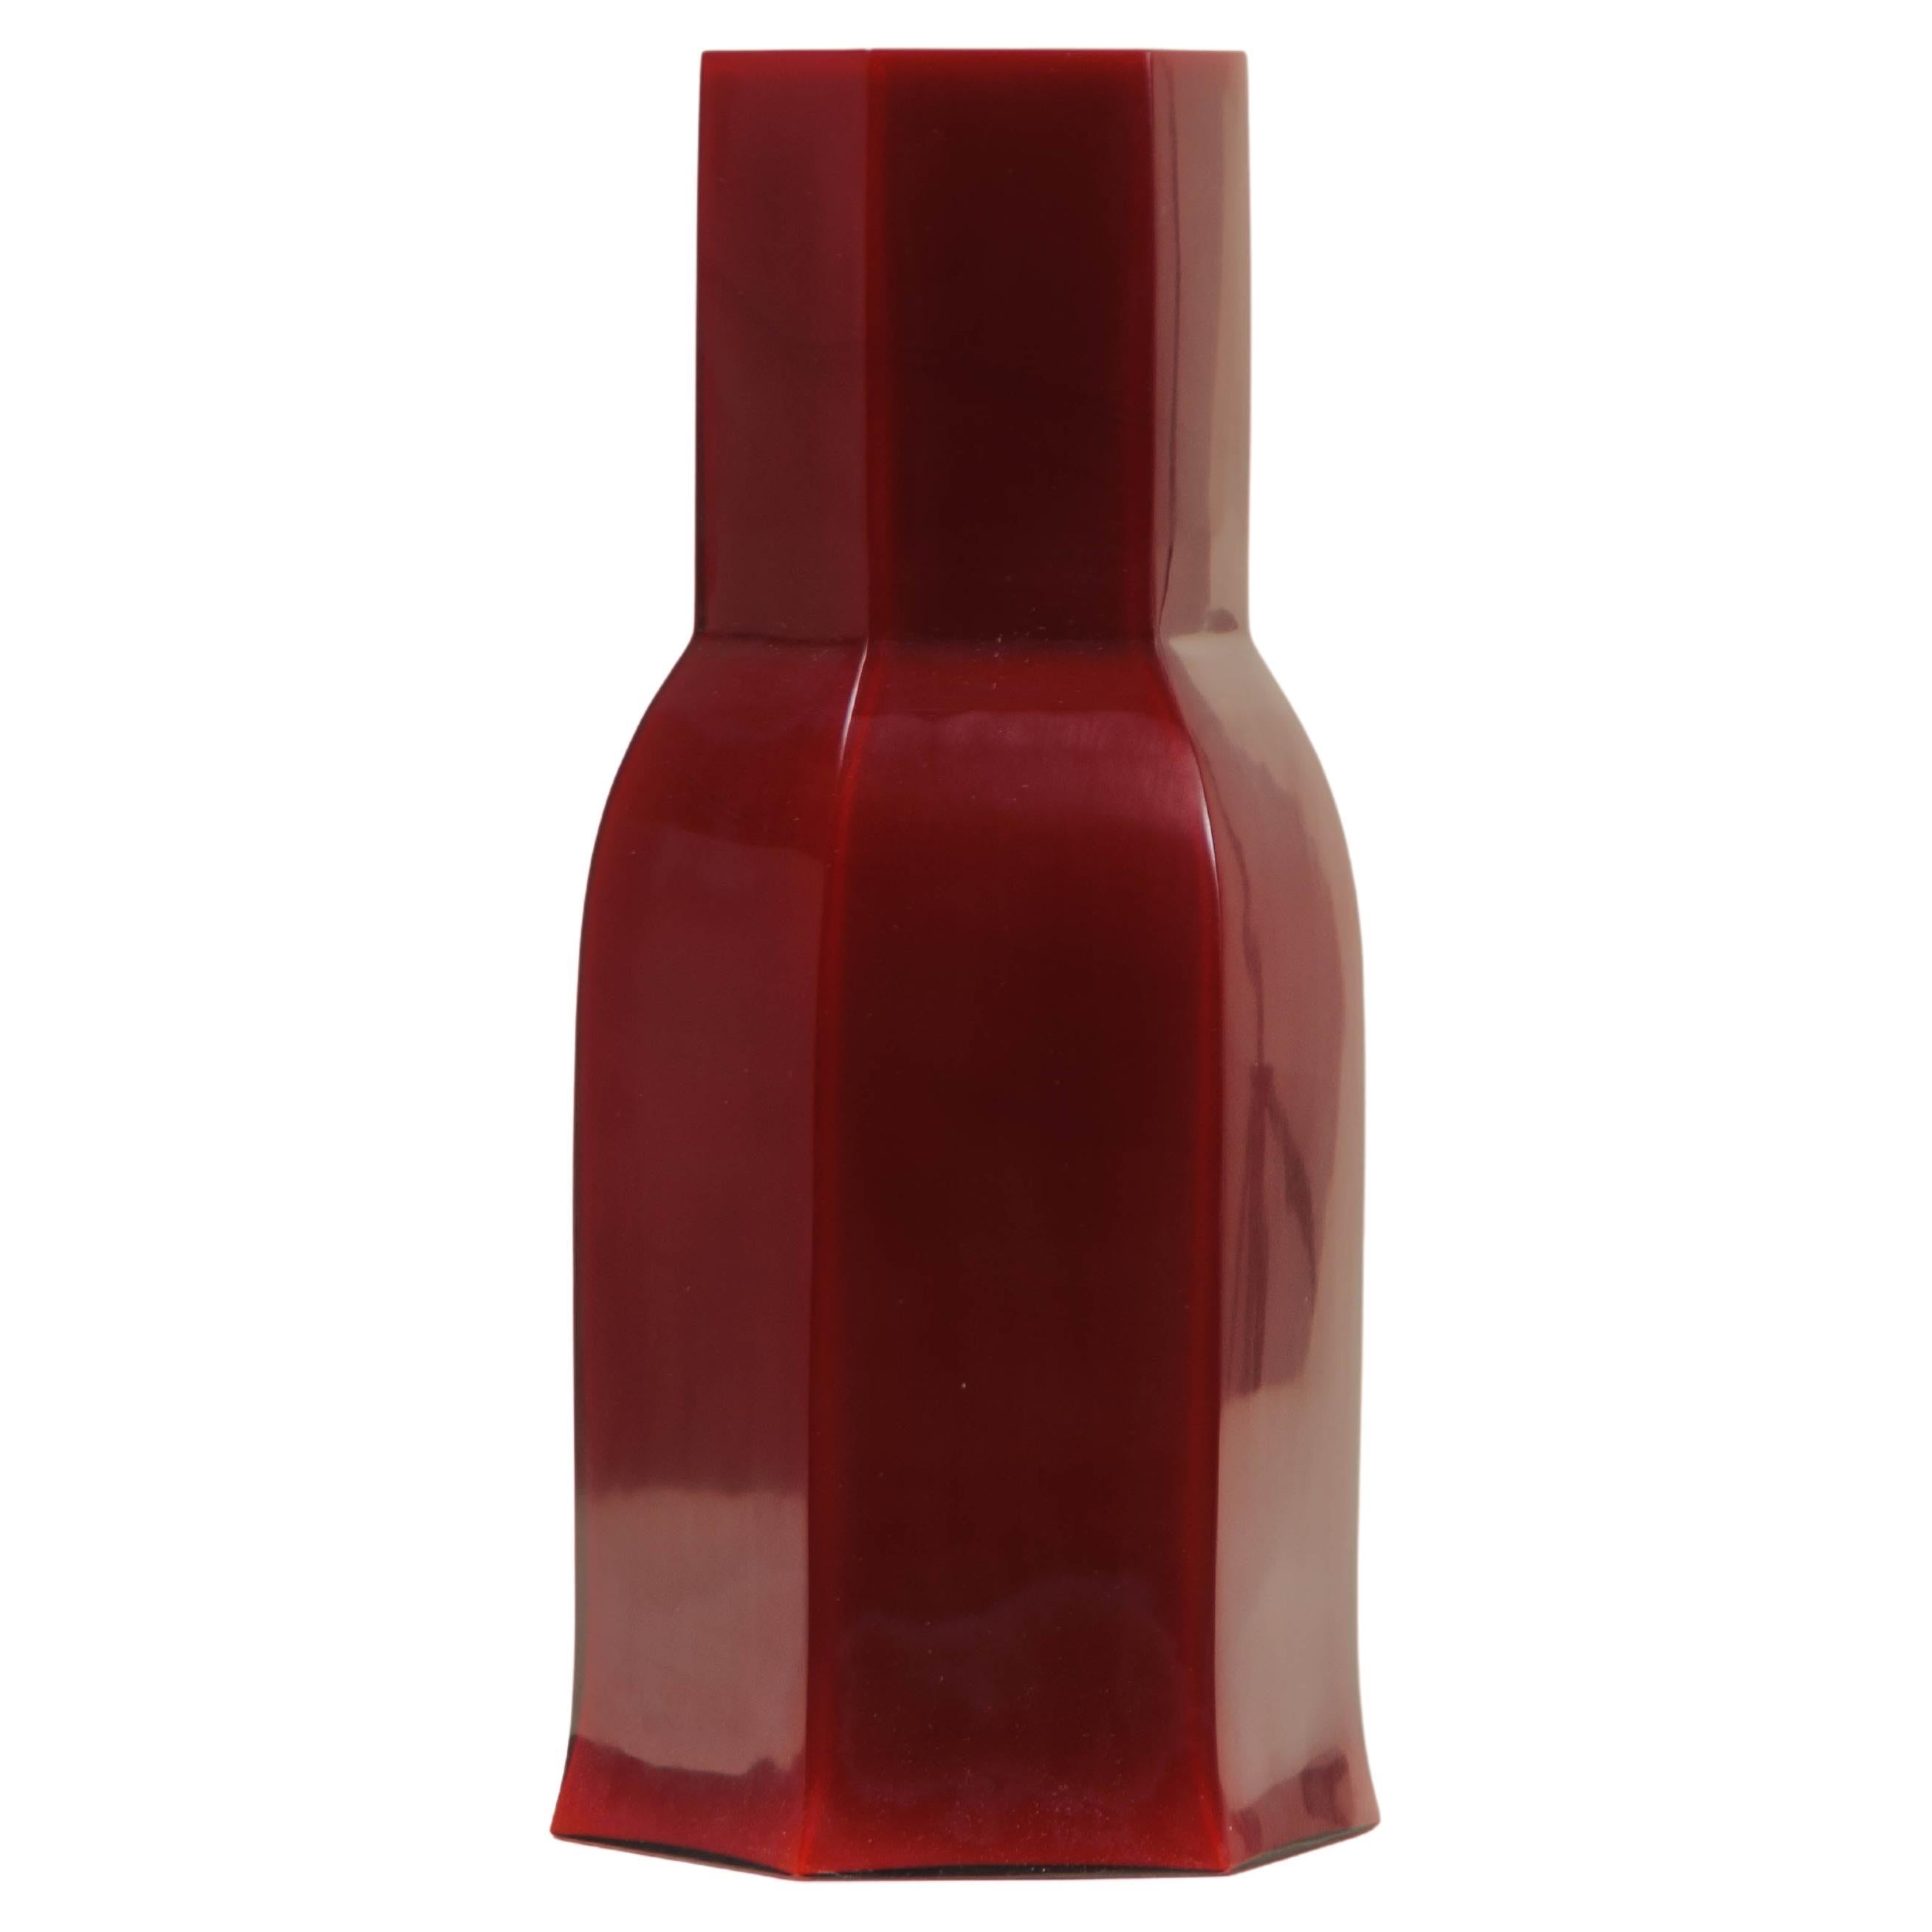 Contemporary Hoof Vase in Raspberry Peking Glass by Robert Kuo, Limited Edition For Sale